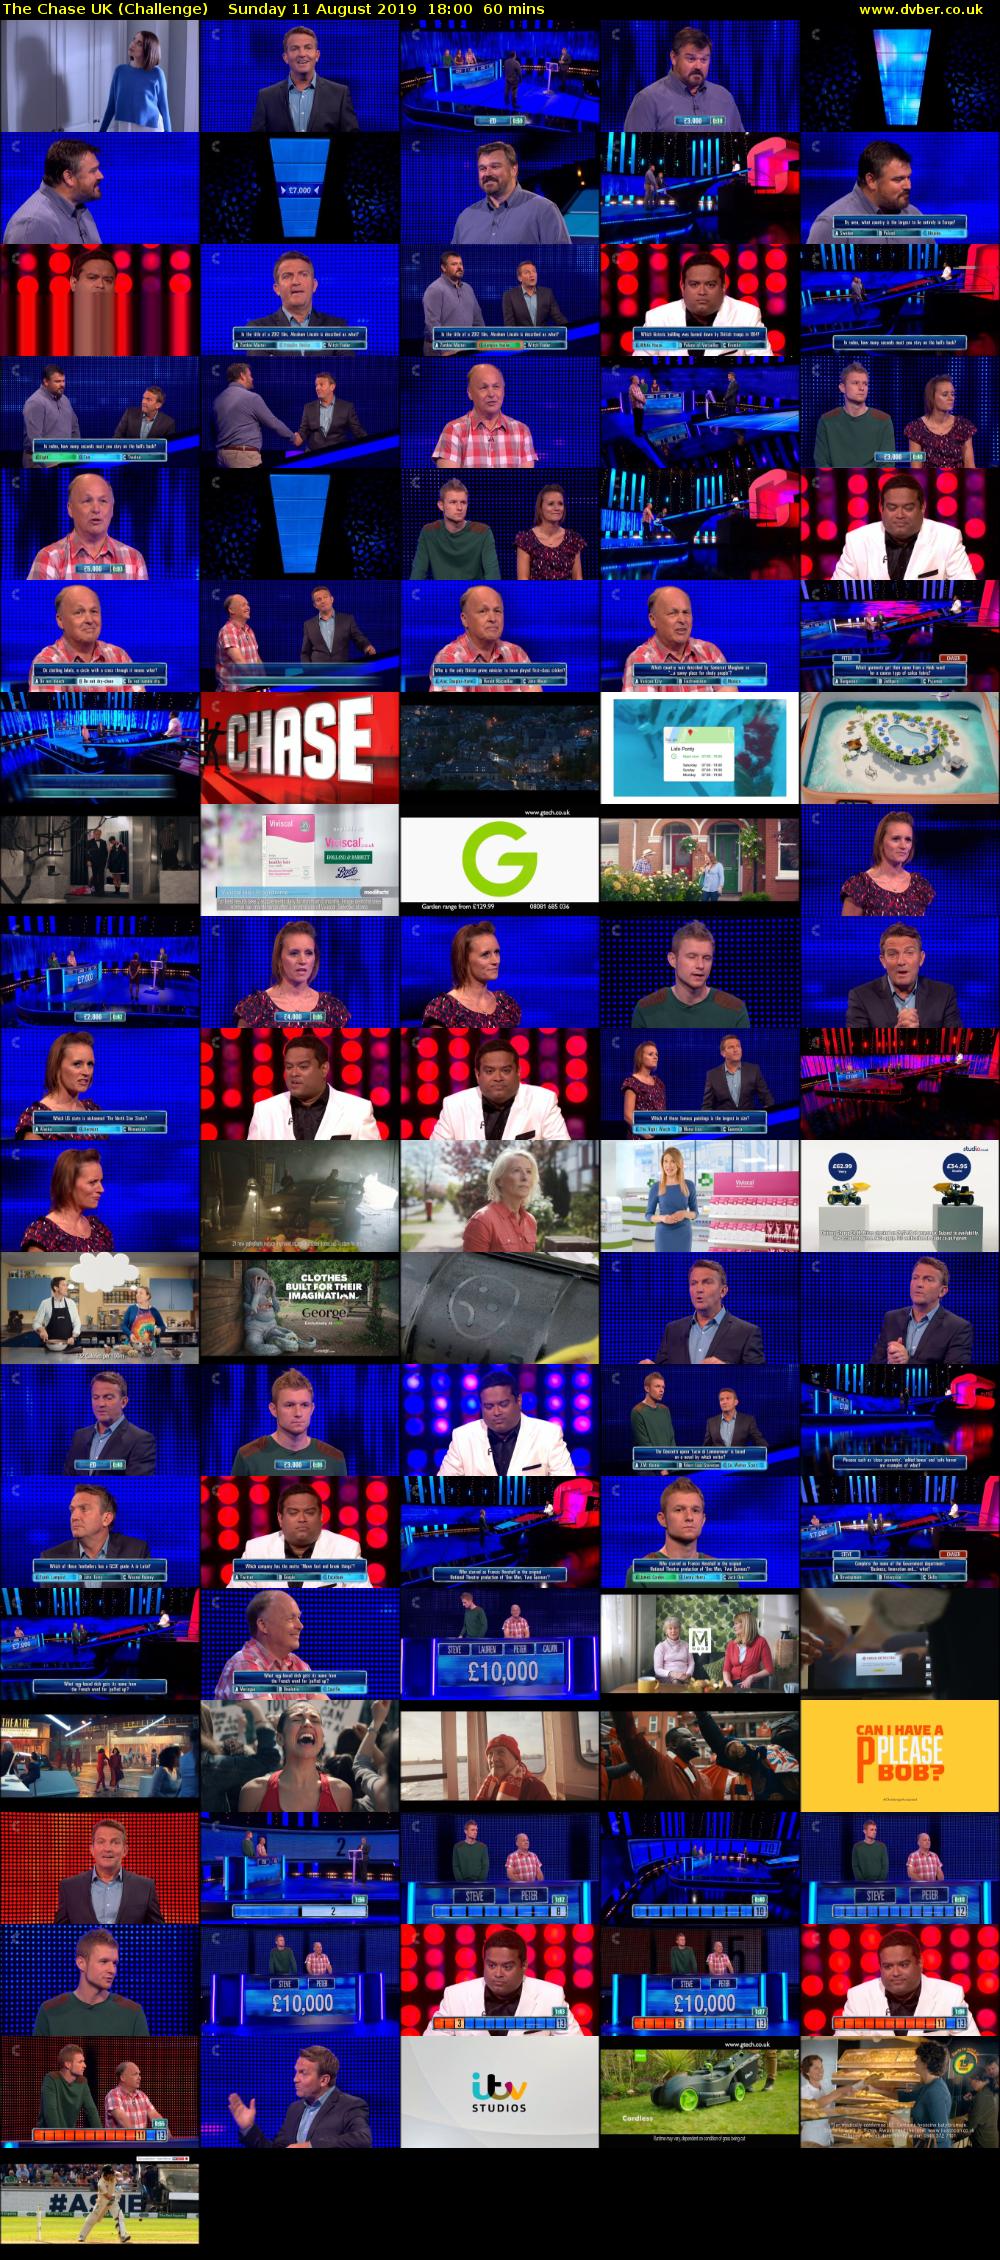 The Chase UK (Challenge) Sunday 11 August 2019 18:00 - 19:00